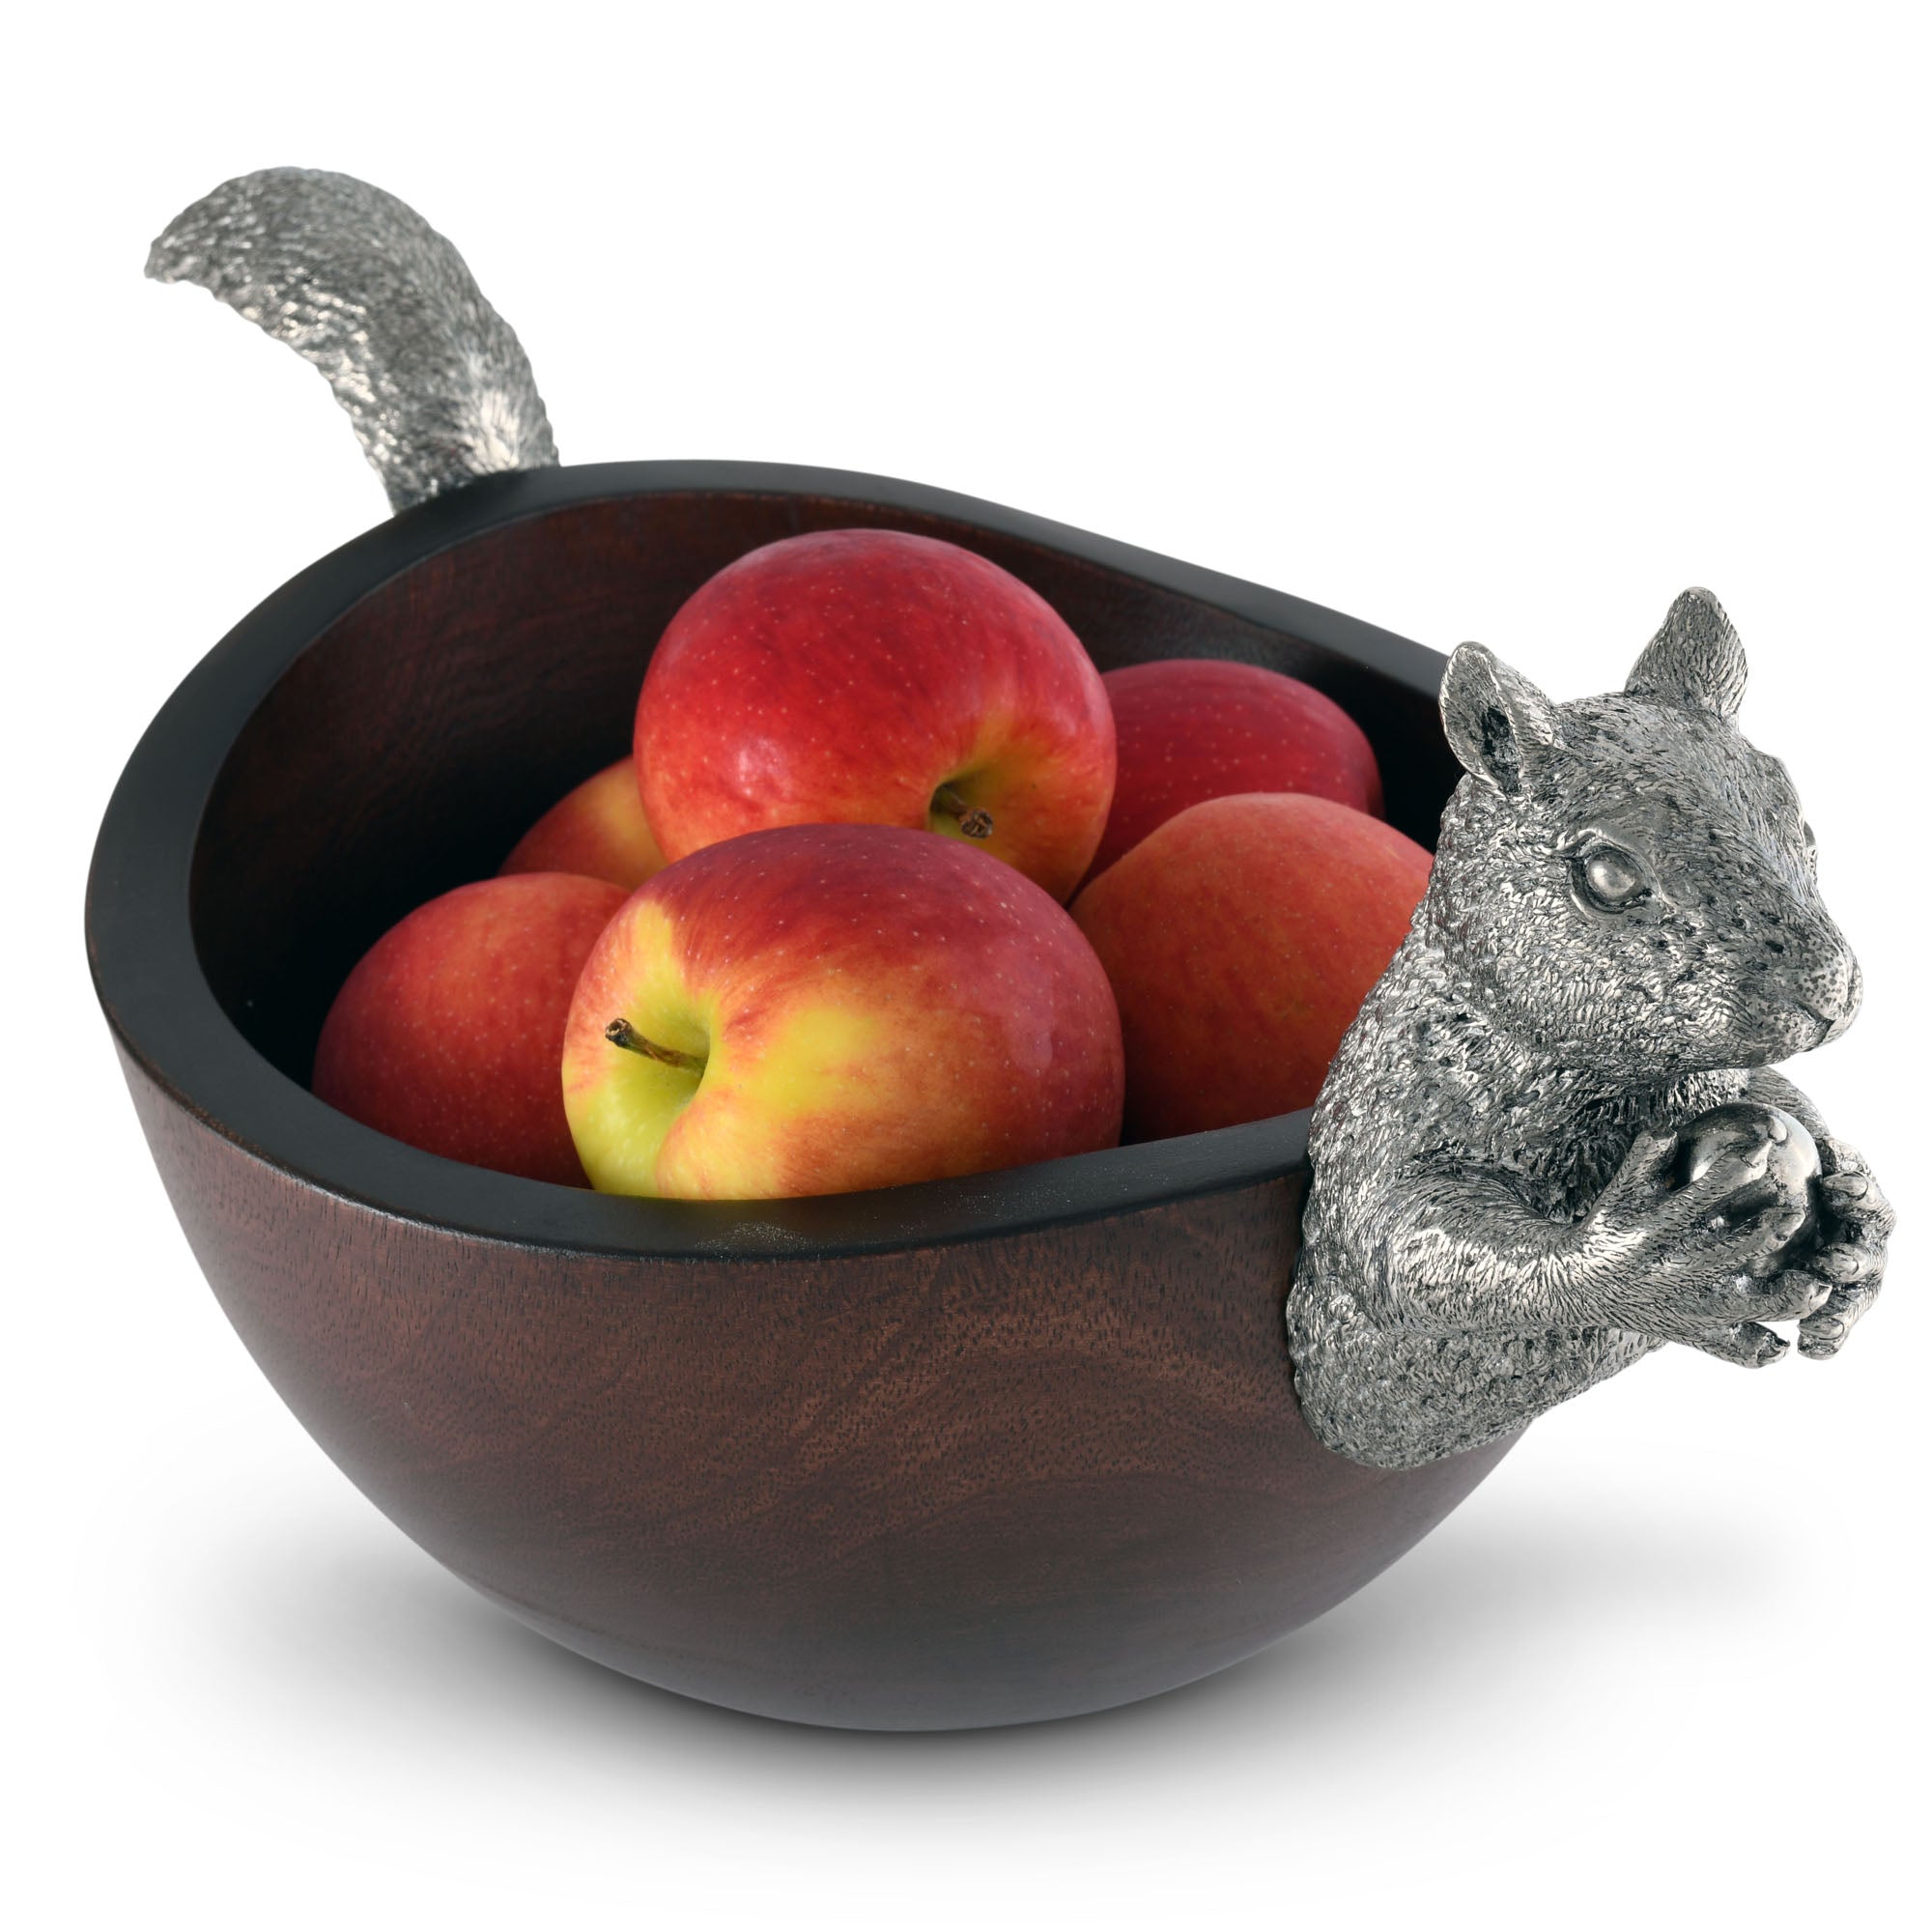 Vagabond House Squirrel Head and Tail Nut Bowl - Lg Product Image